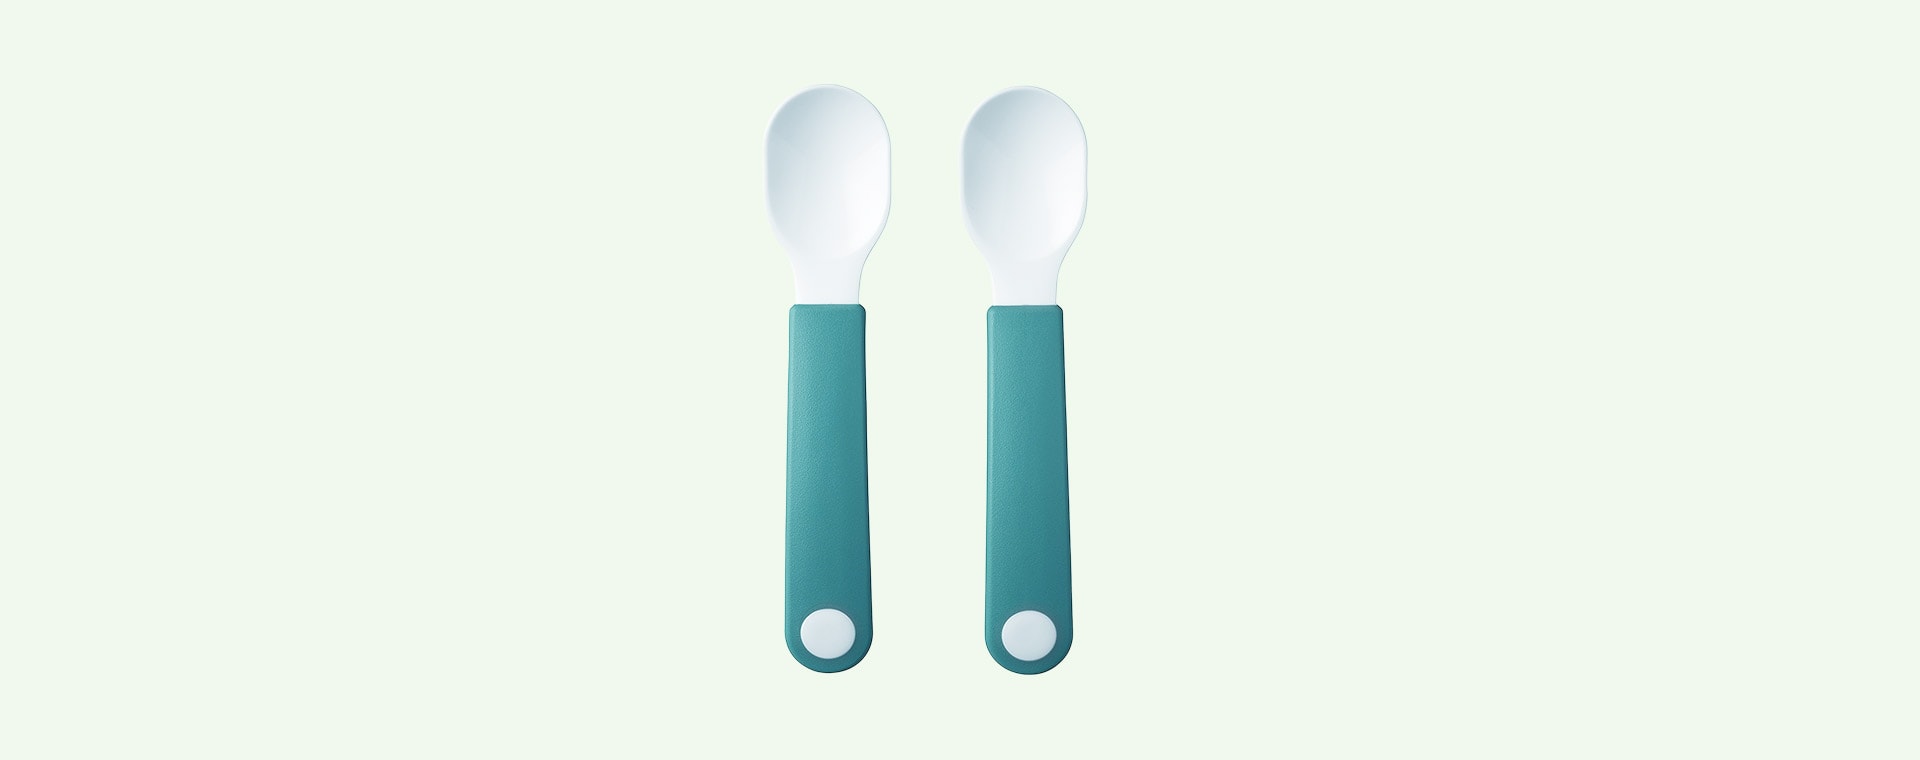 Deep Turquoise Mepal 2-Pack Trainer Spoon Set Mio